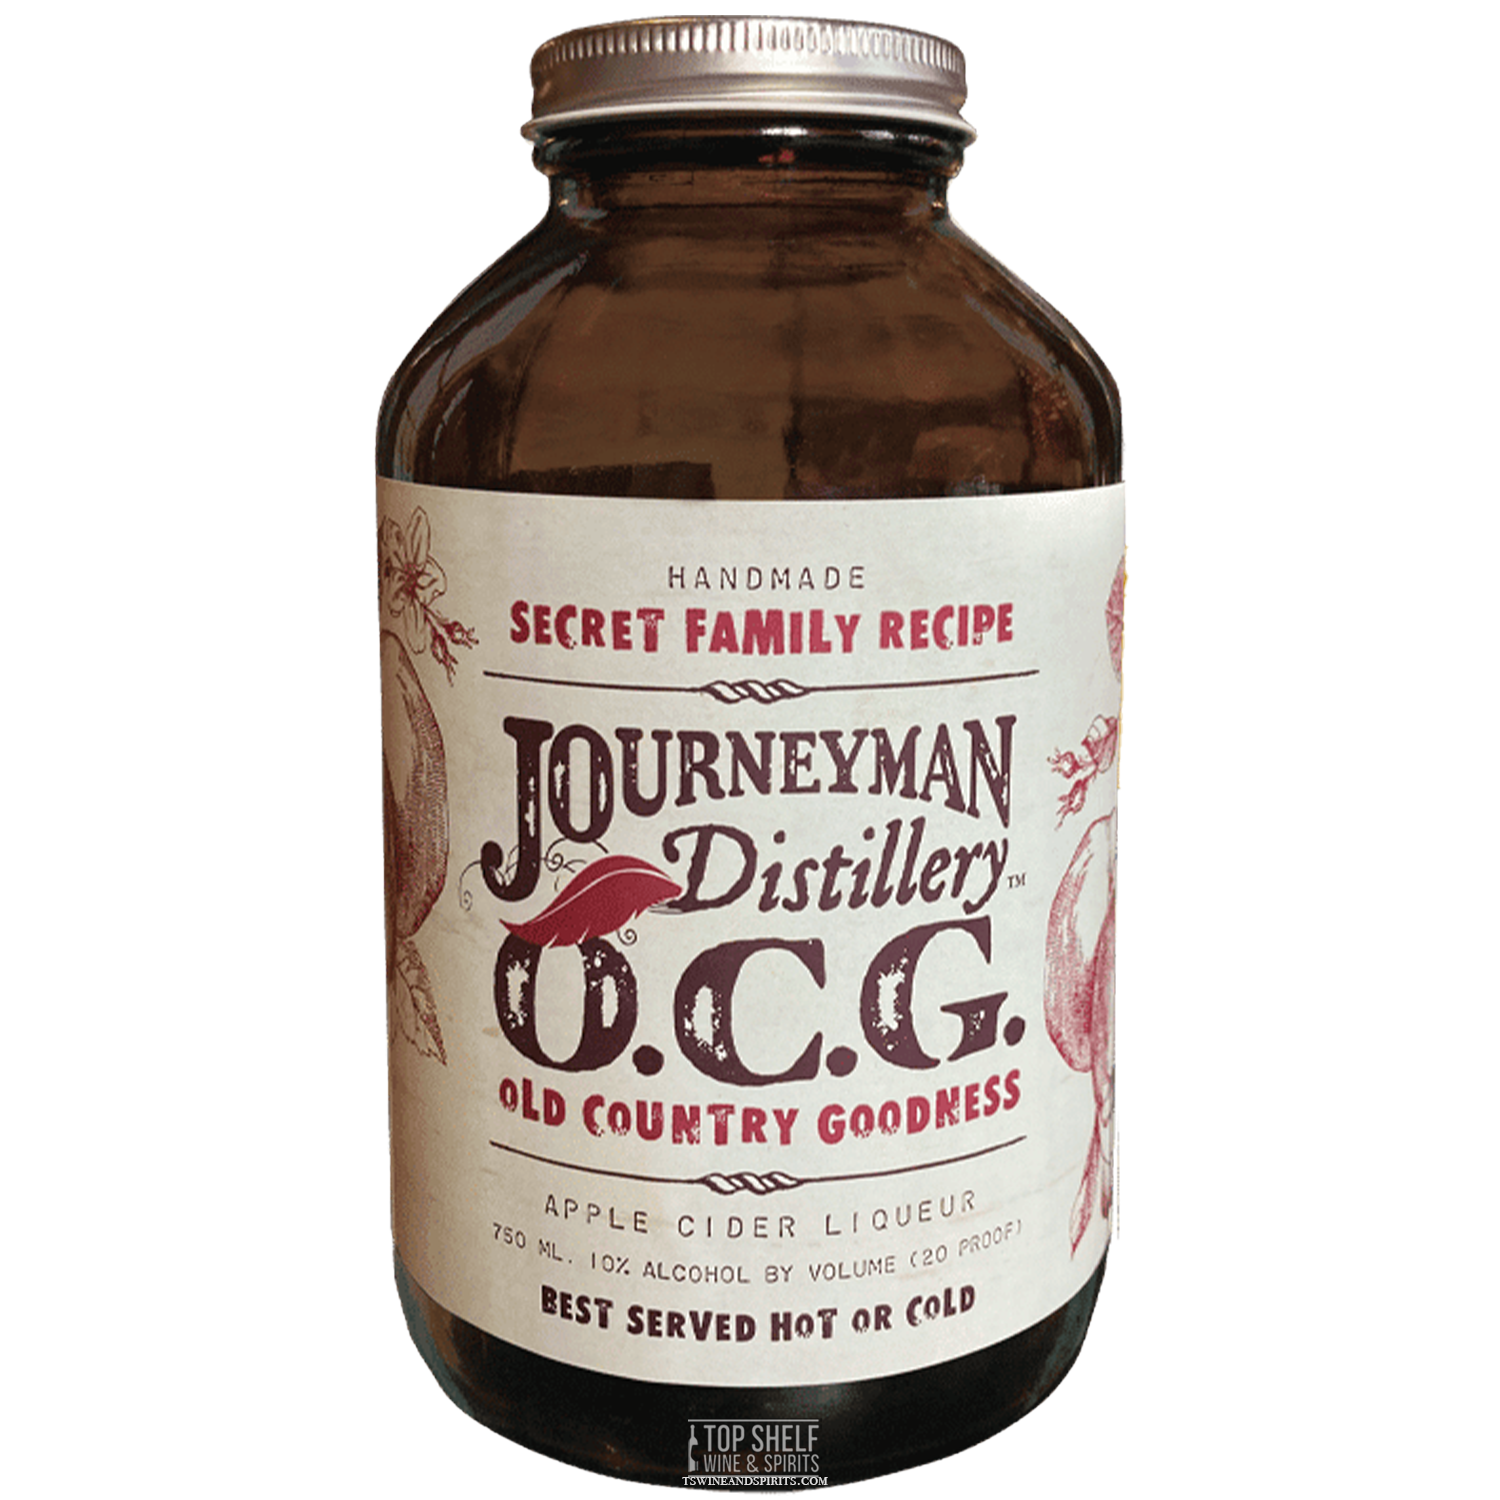 Journeyman Old Country Goodness Apple Cider Liqueur